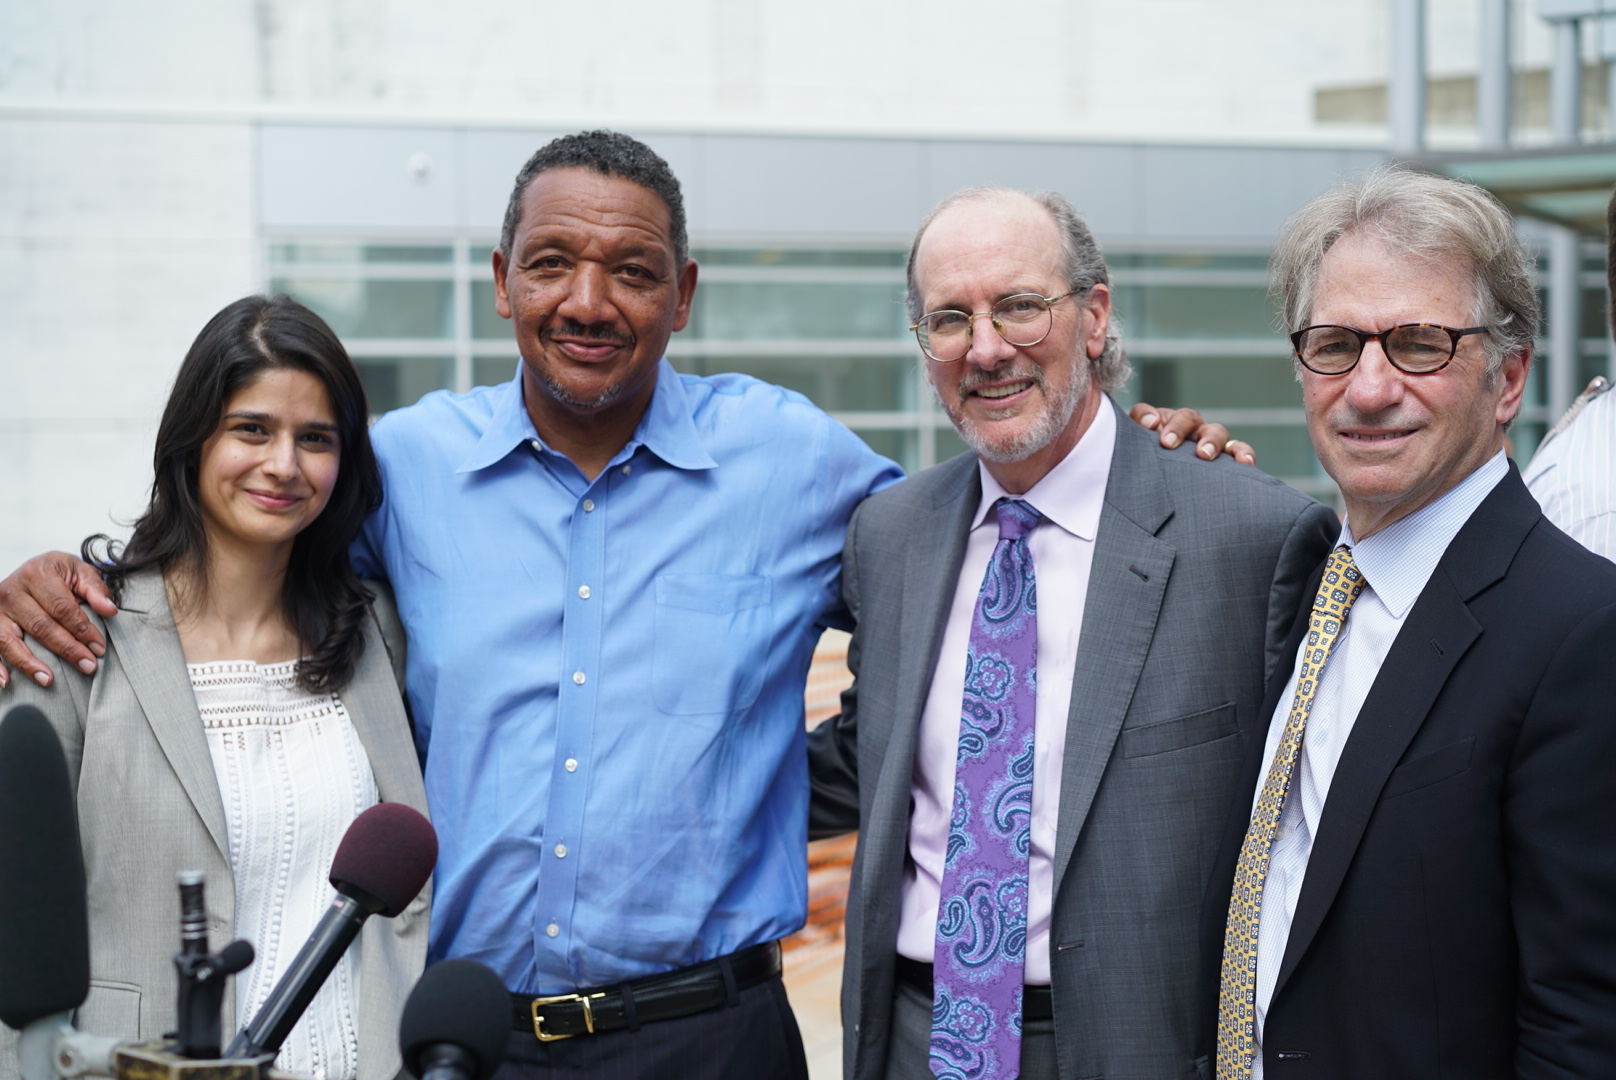 Howard with his legal team, Seema Saifee, James Cooley (in grey) and Barry Scheck (right).